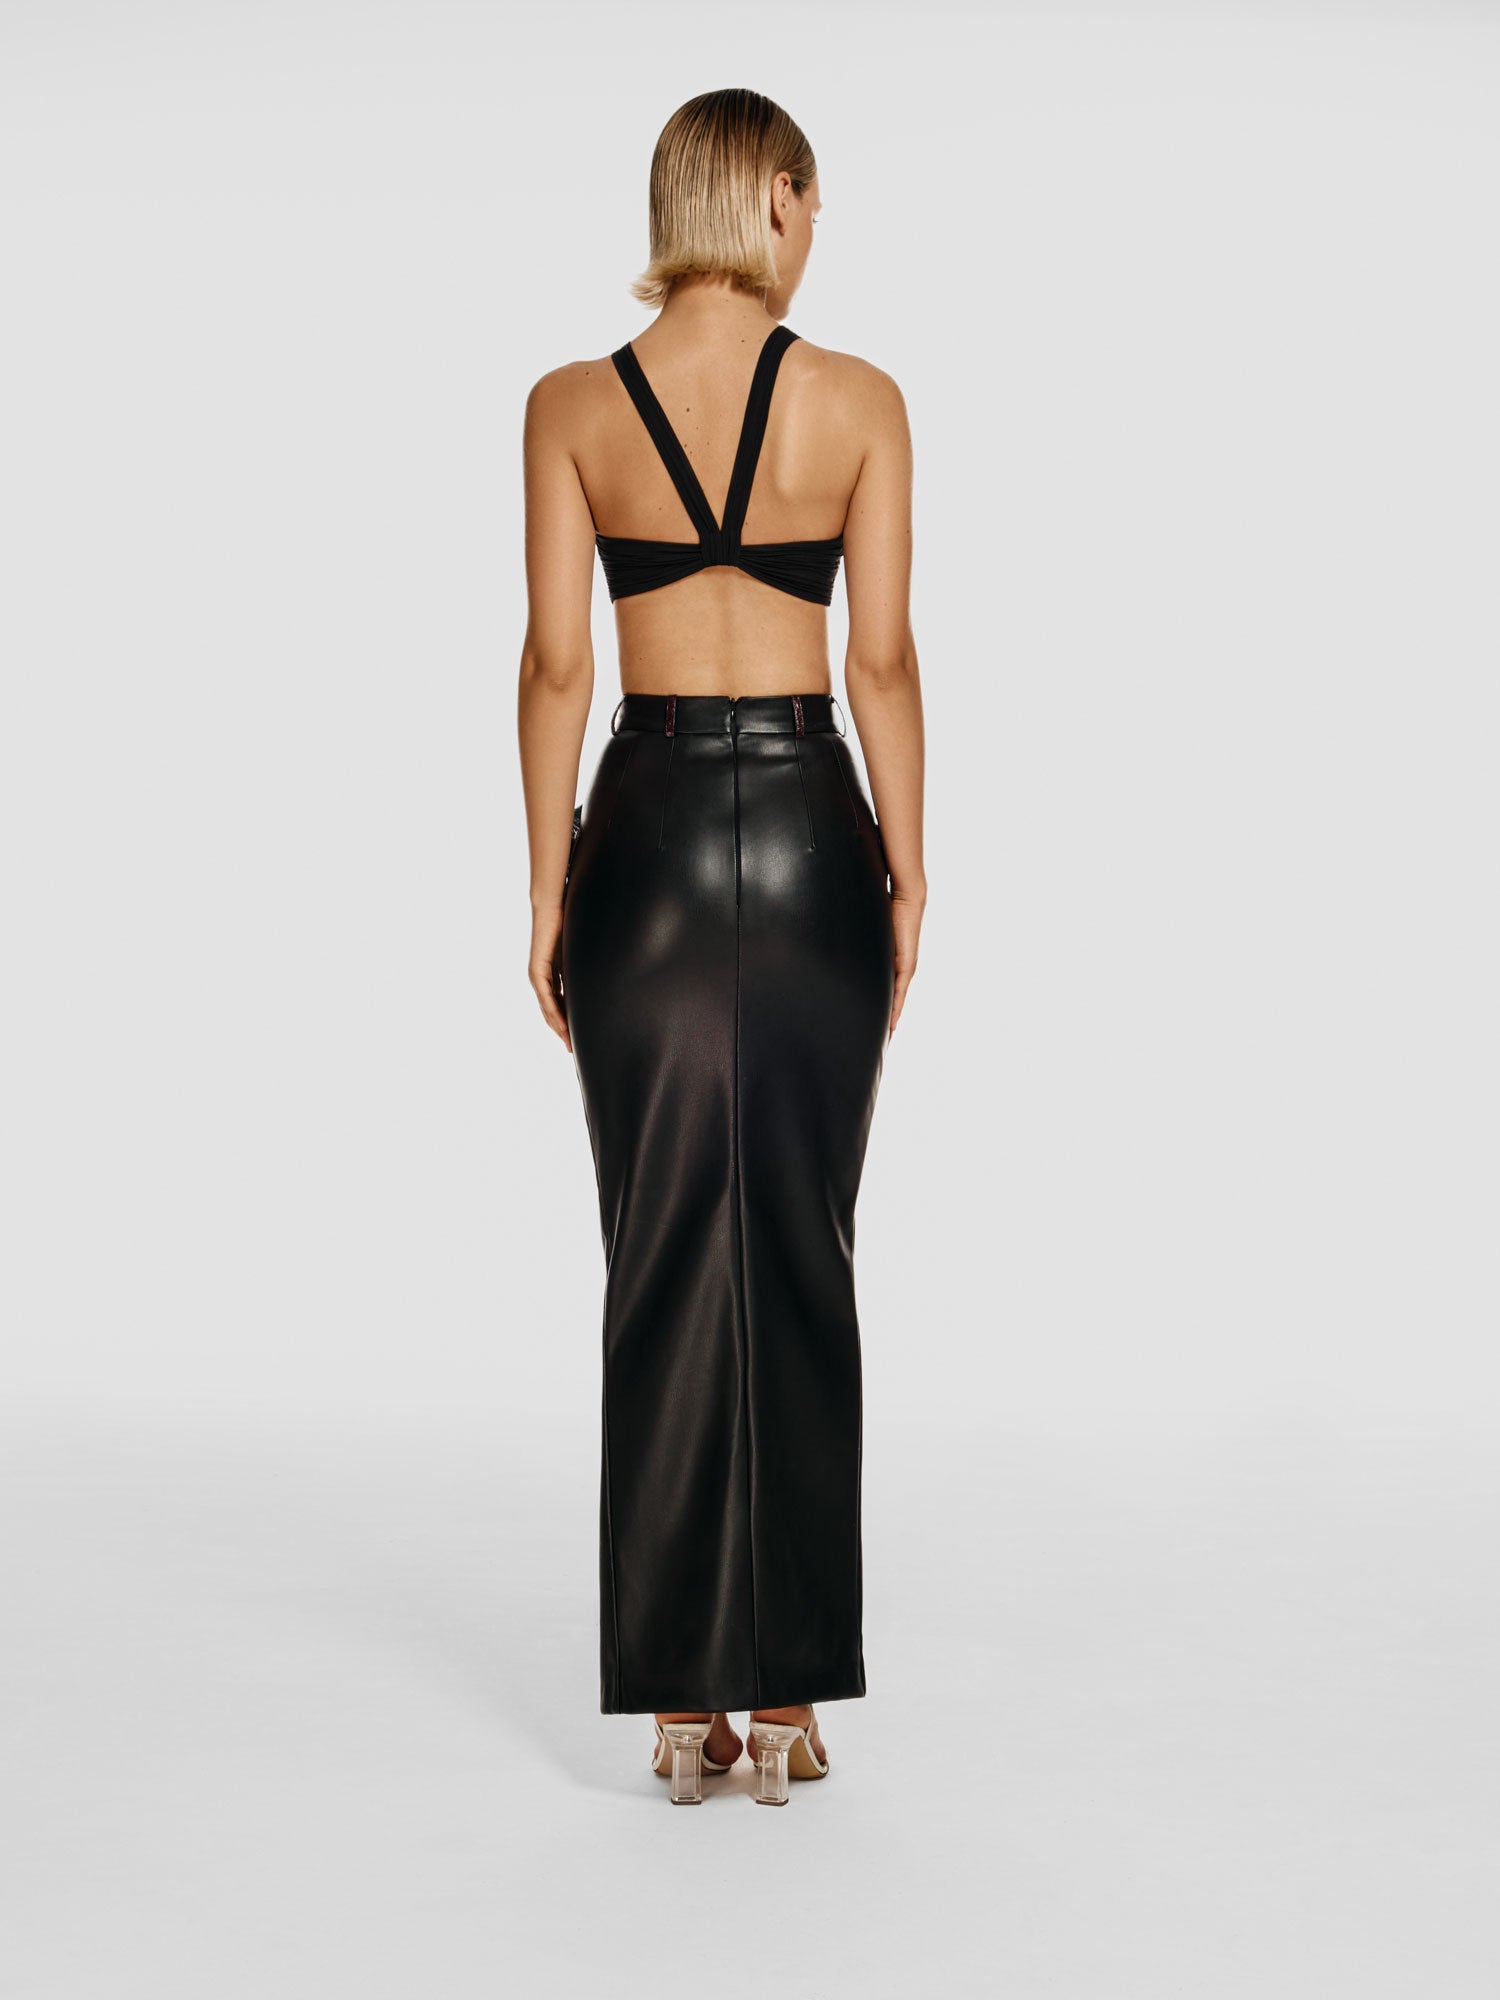 Full shot of a girl facing back in a black viscose crop top and a black vegan leather maxi skirt with a high front slit